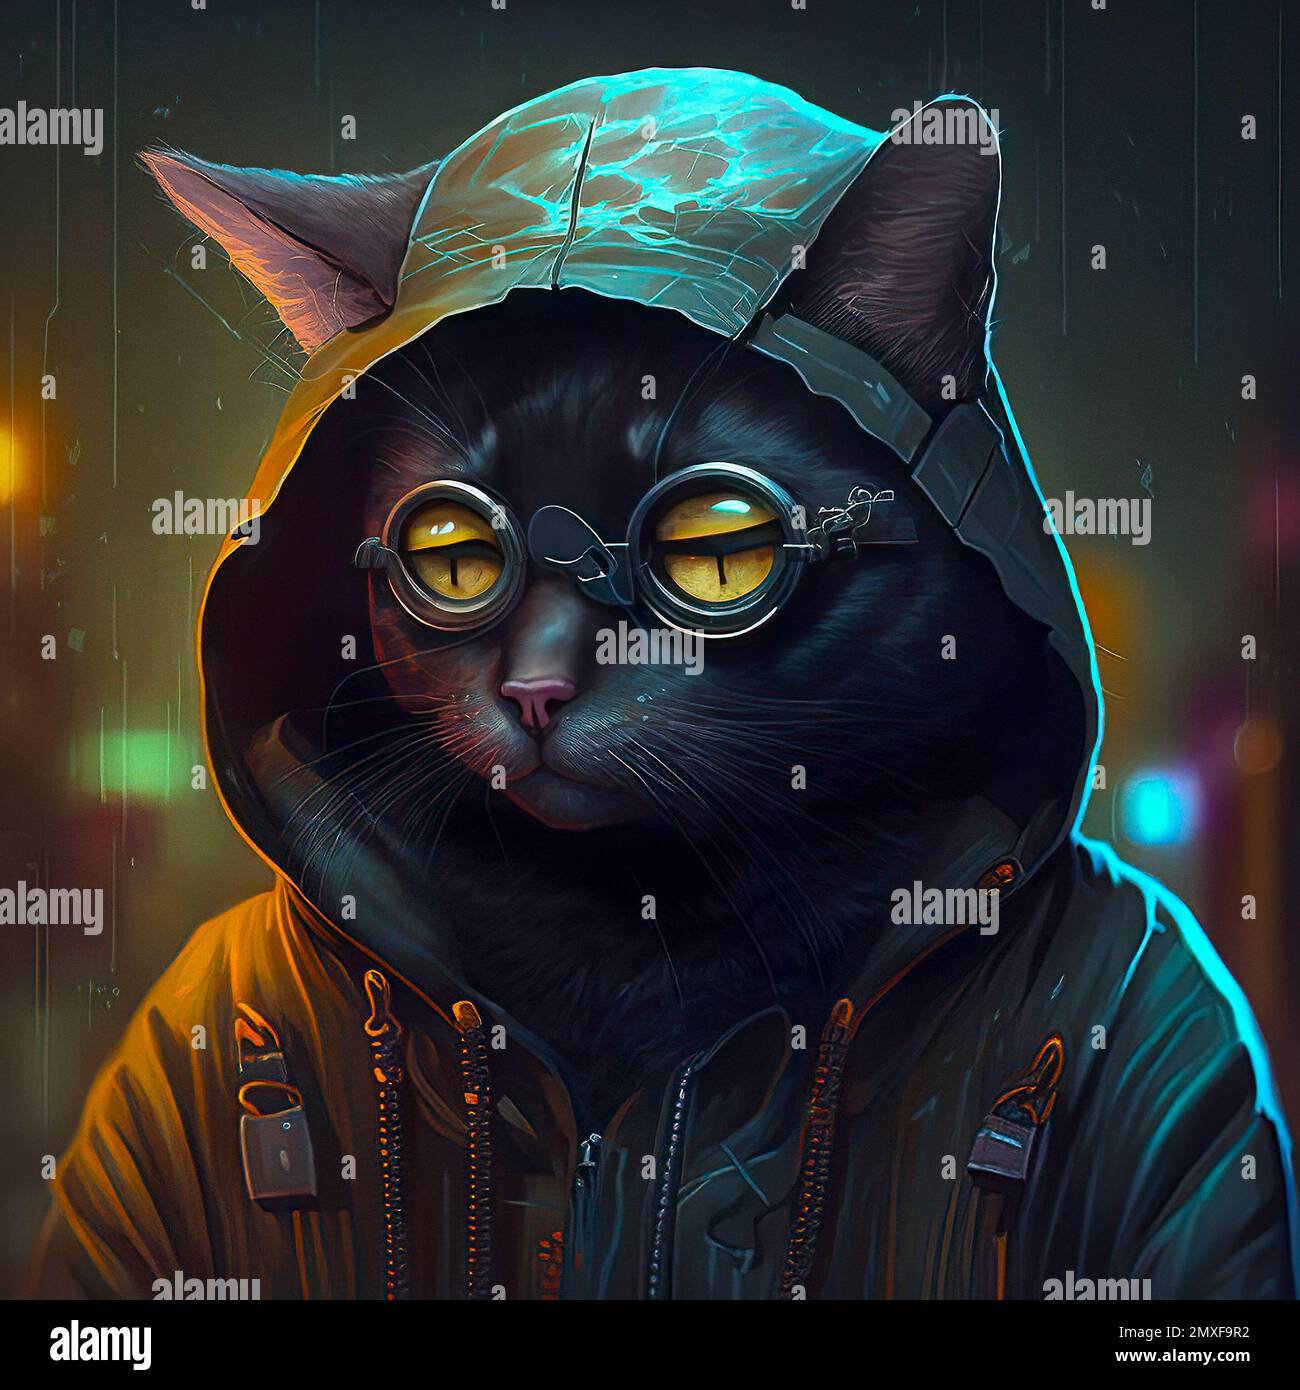 Dystopian Art Gloomy Black Cat with Bright Yellow Eyes Wearing a Hoodie,  Hat and Glasses Stock Photo - Alamy